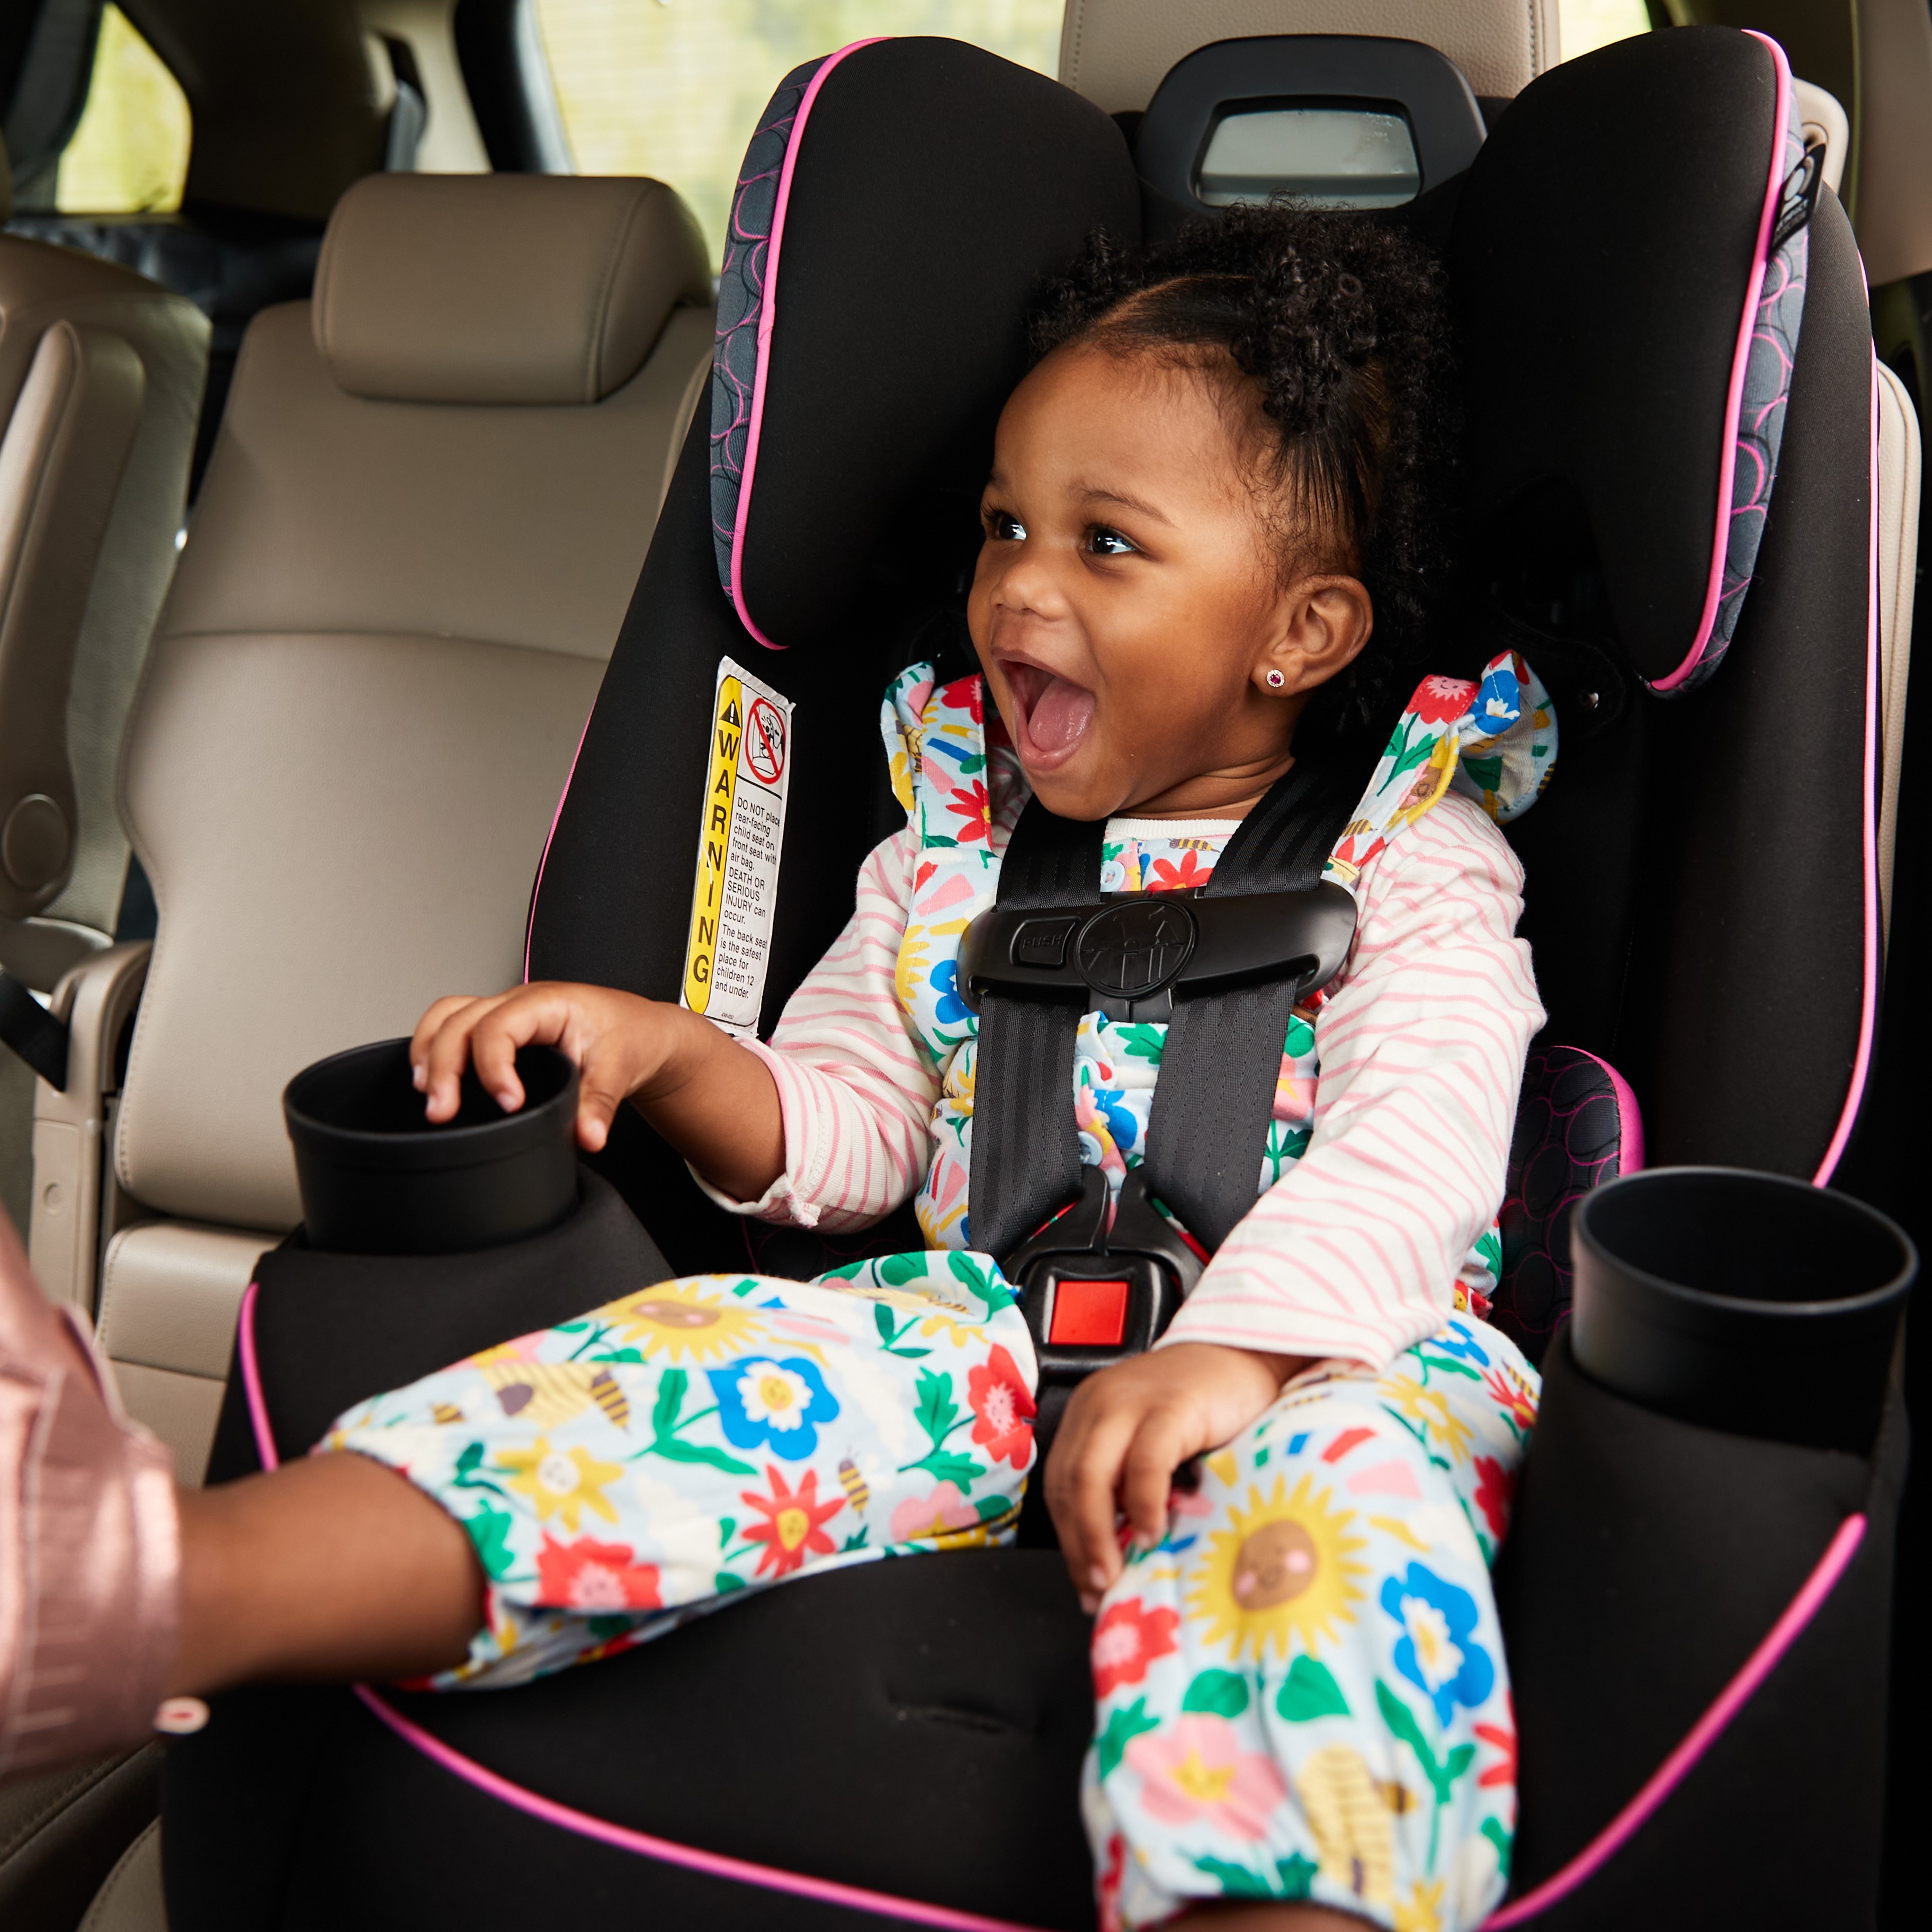 Cosco Kids Easy Elite Slim All-in-One Convertible Car Seat, Pink Rings - image 4 of 28